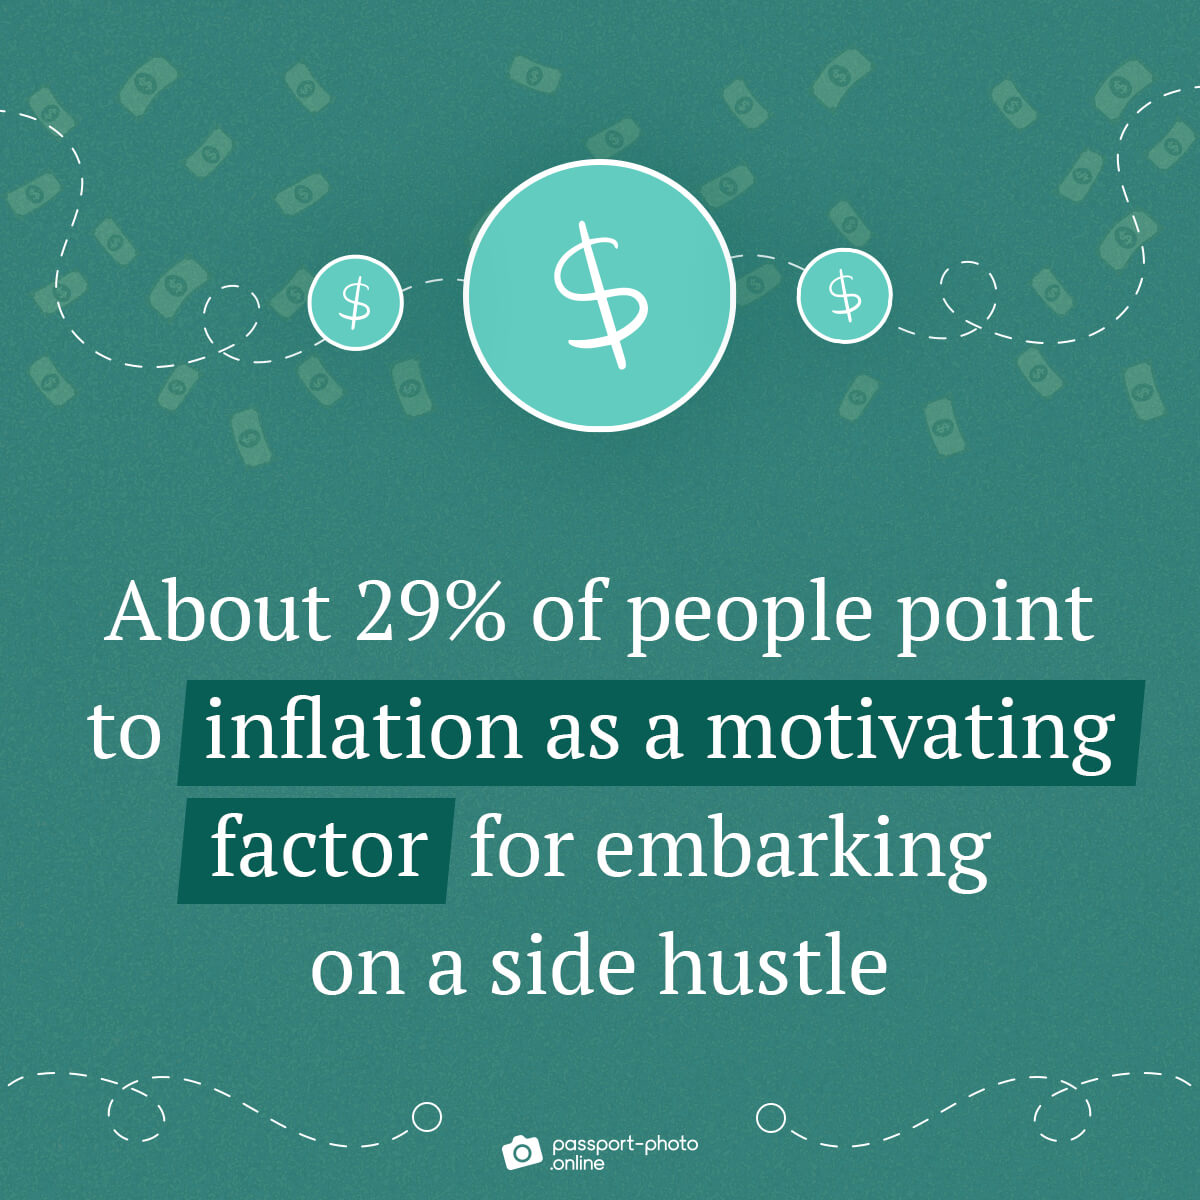 29% of people point to inflation as a motivating factor for embarking on a side hustle